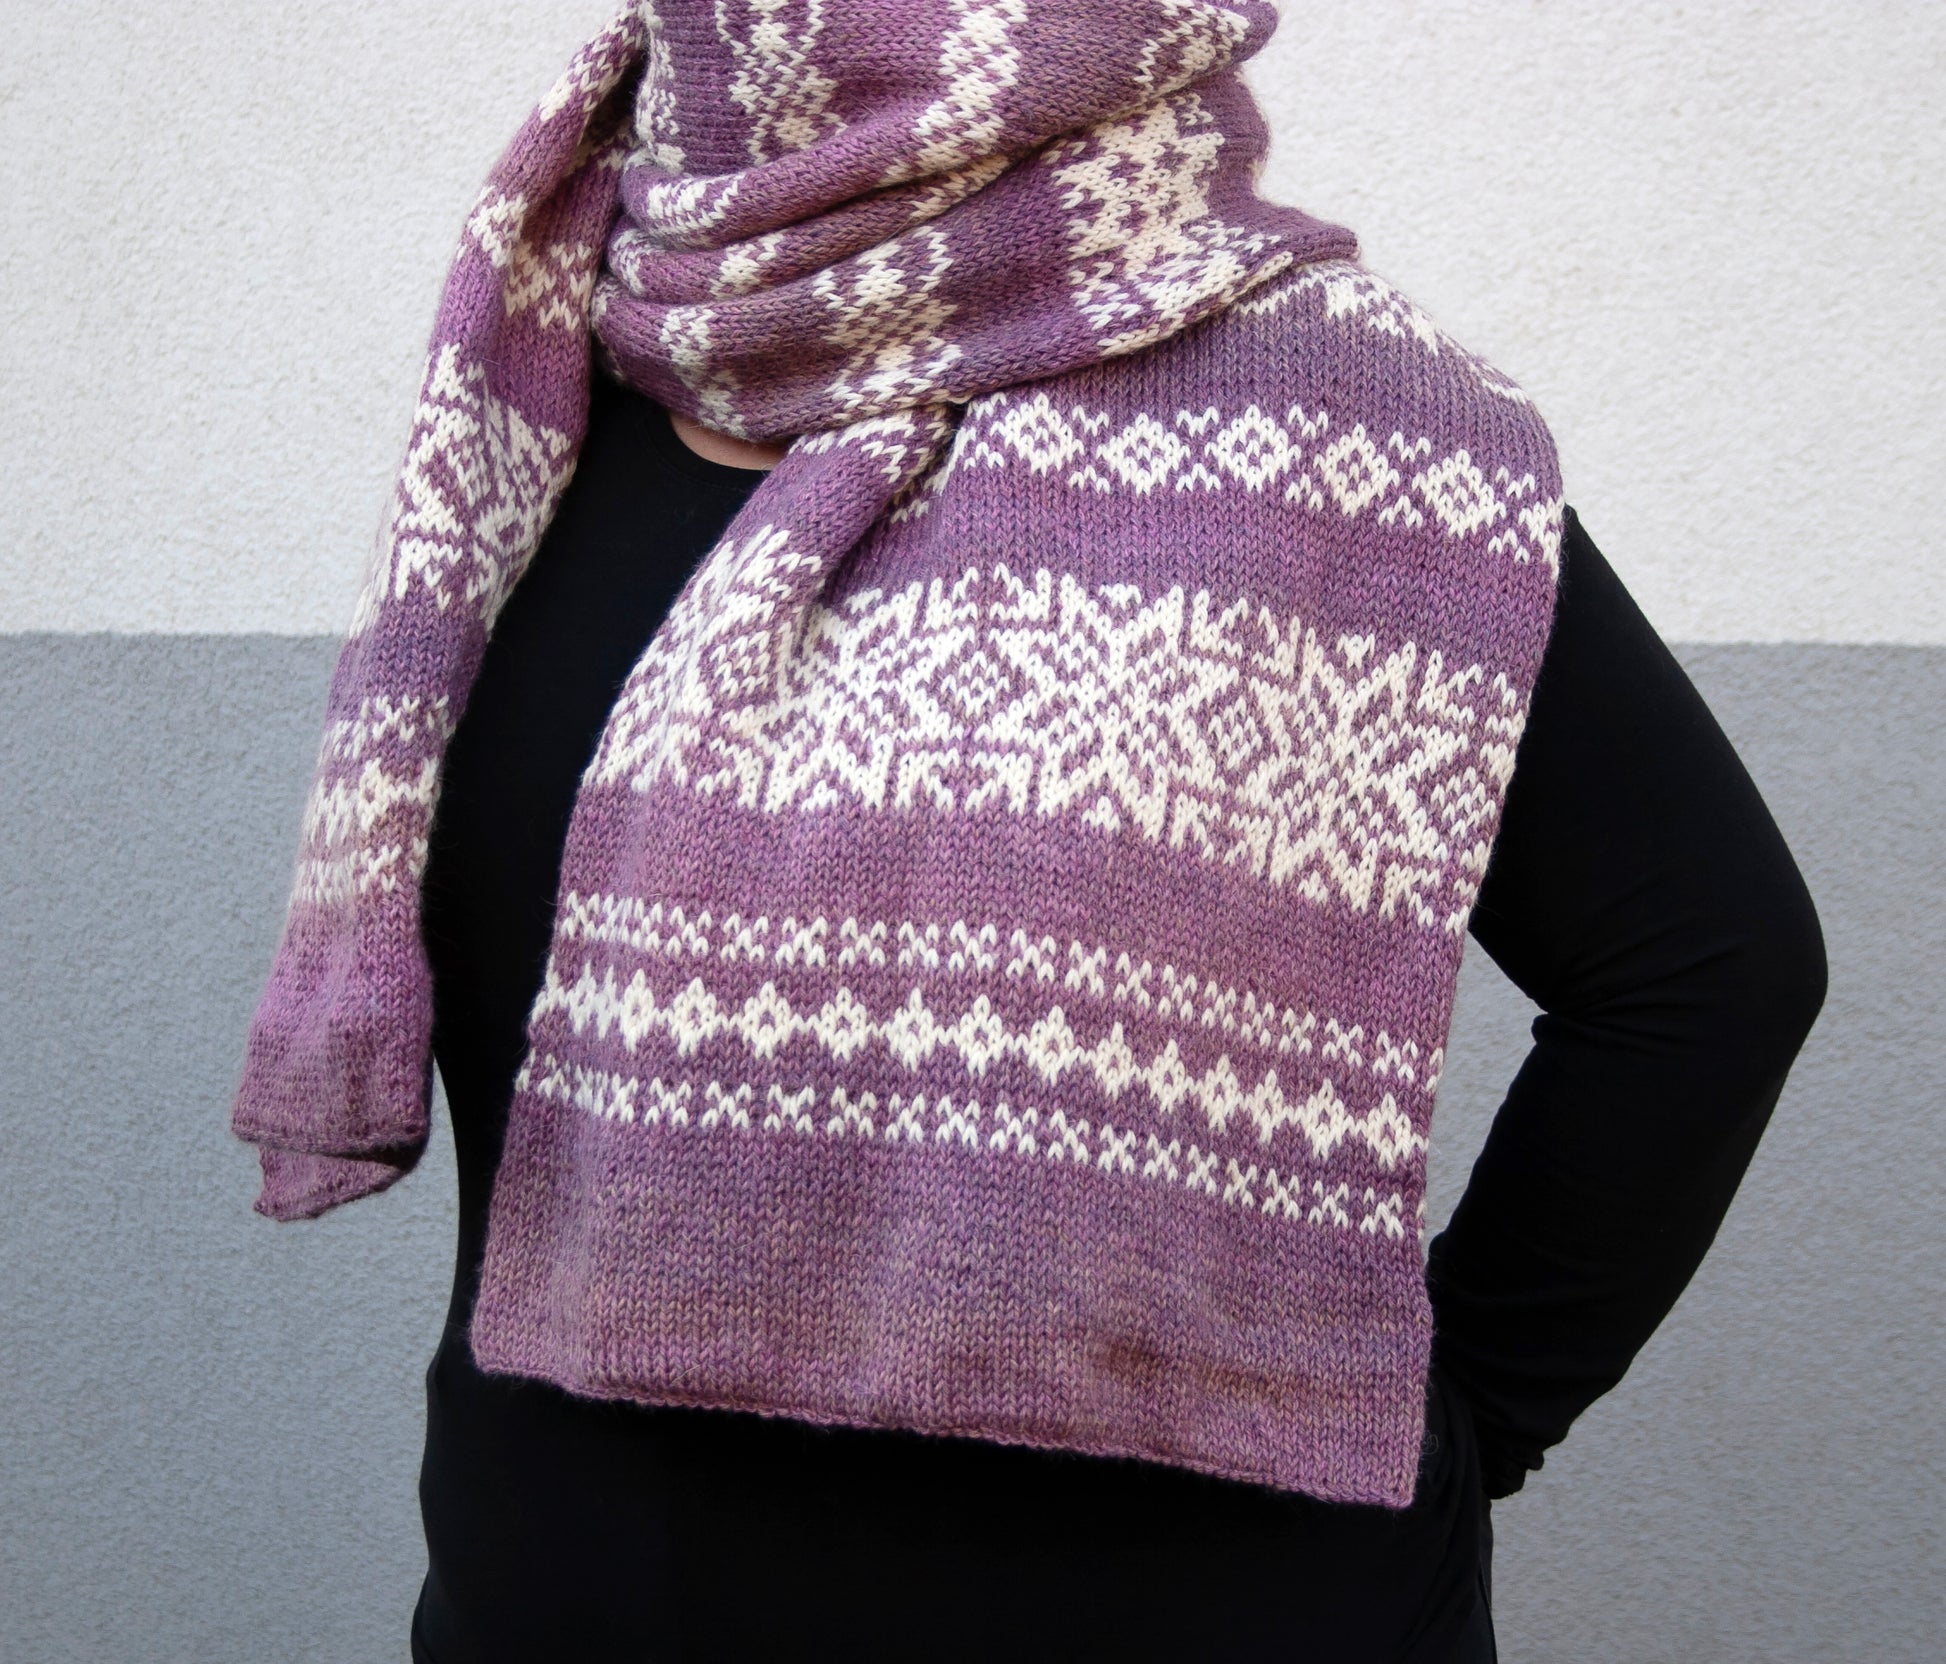 long hand-knitted Fair Isle scarf made from gradient purple and white wool yarn